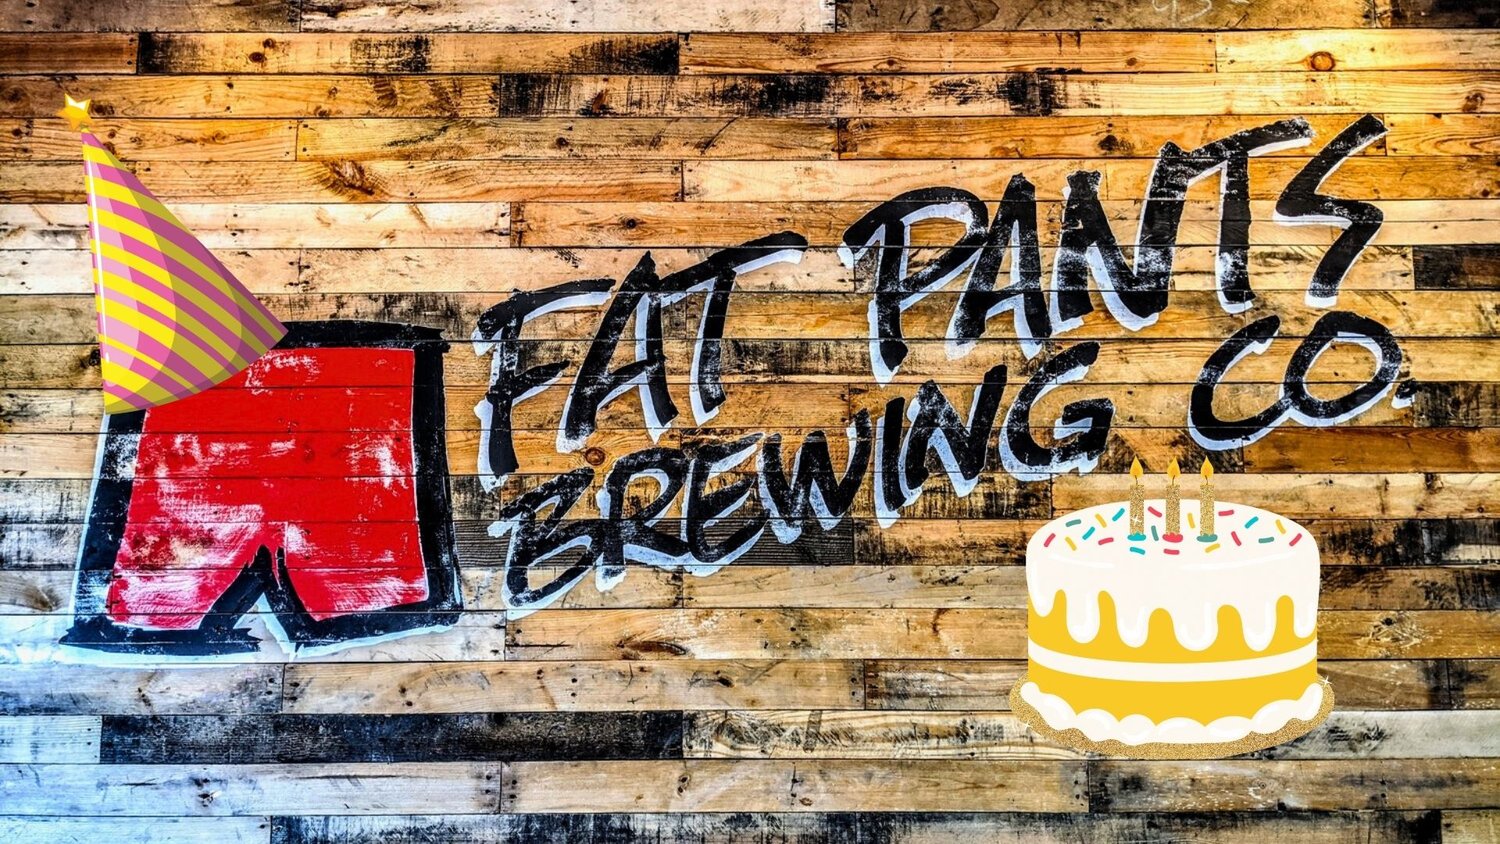 Embroidered logo patch — Fat Pants Brewing Co.